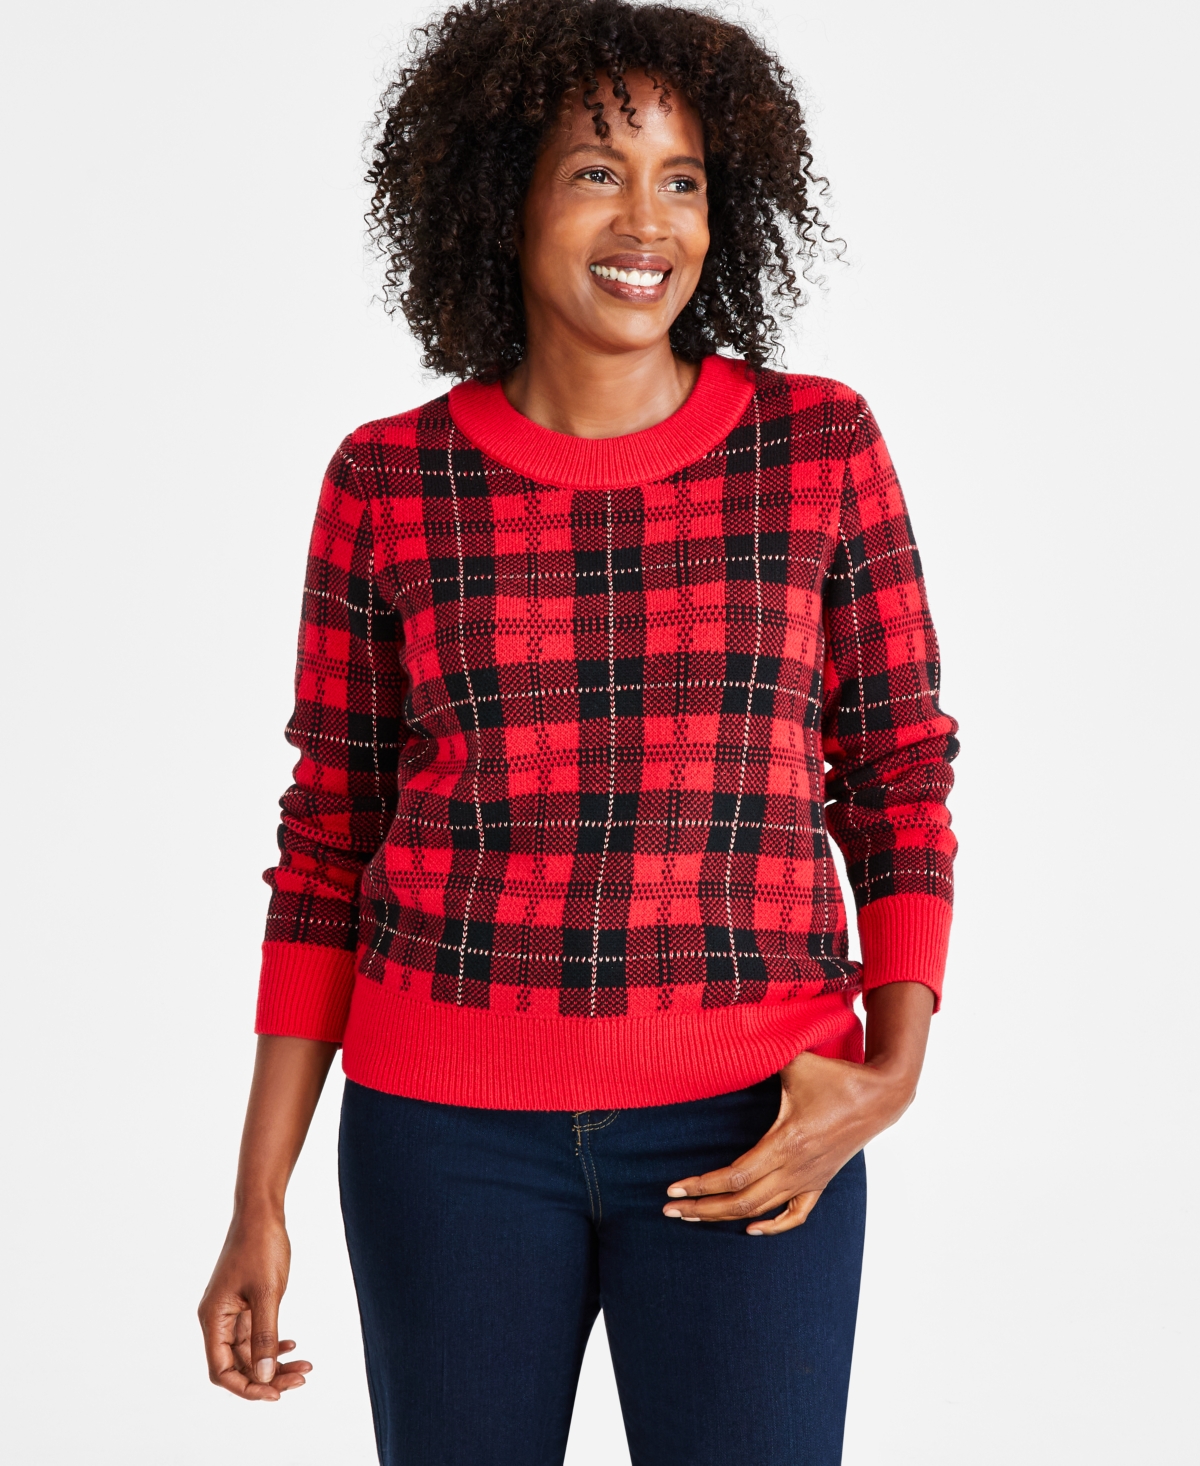 STYLE & CO WOMEN'S PLAID LONG-SLEEVE SWEATER WITH SHINE, REGULAR & PETITE, CREATED FOR MACY'S